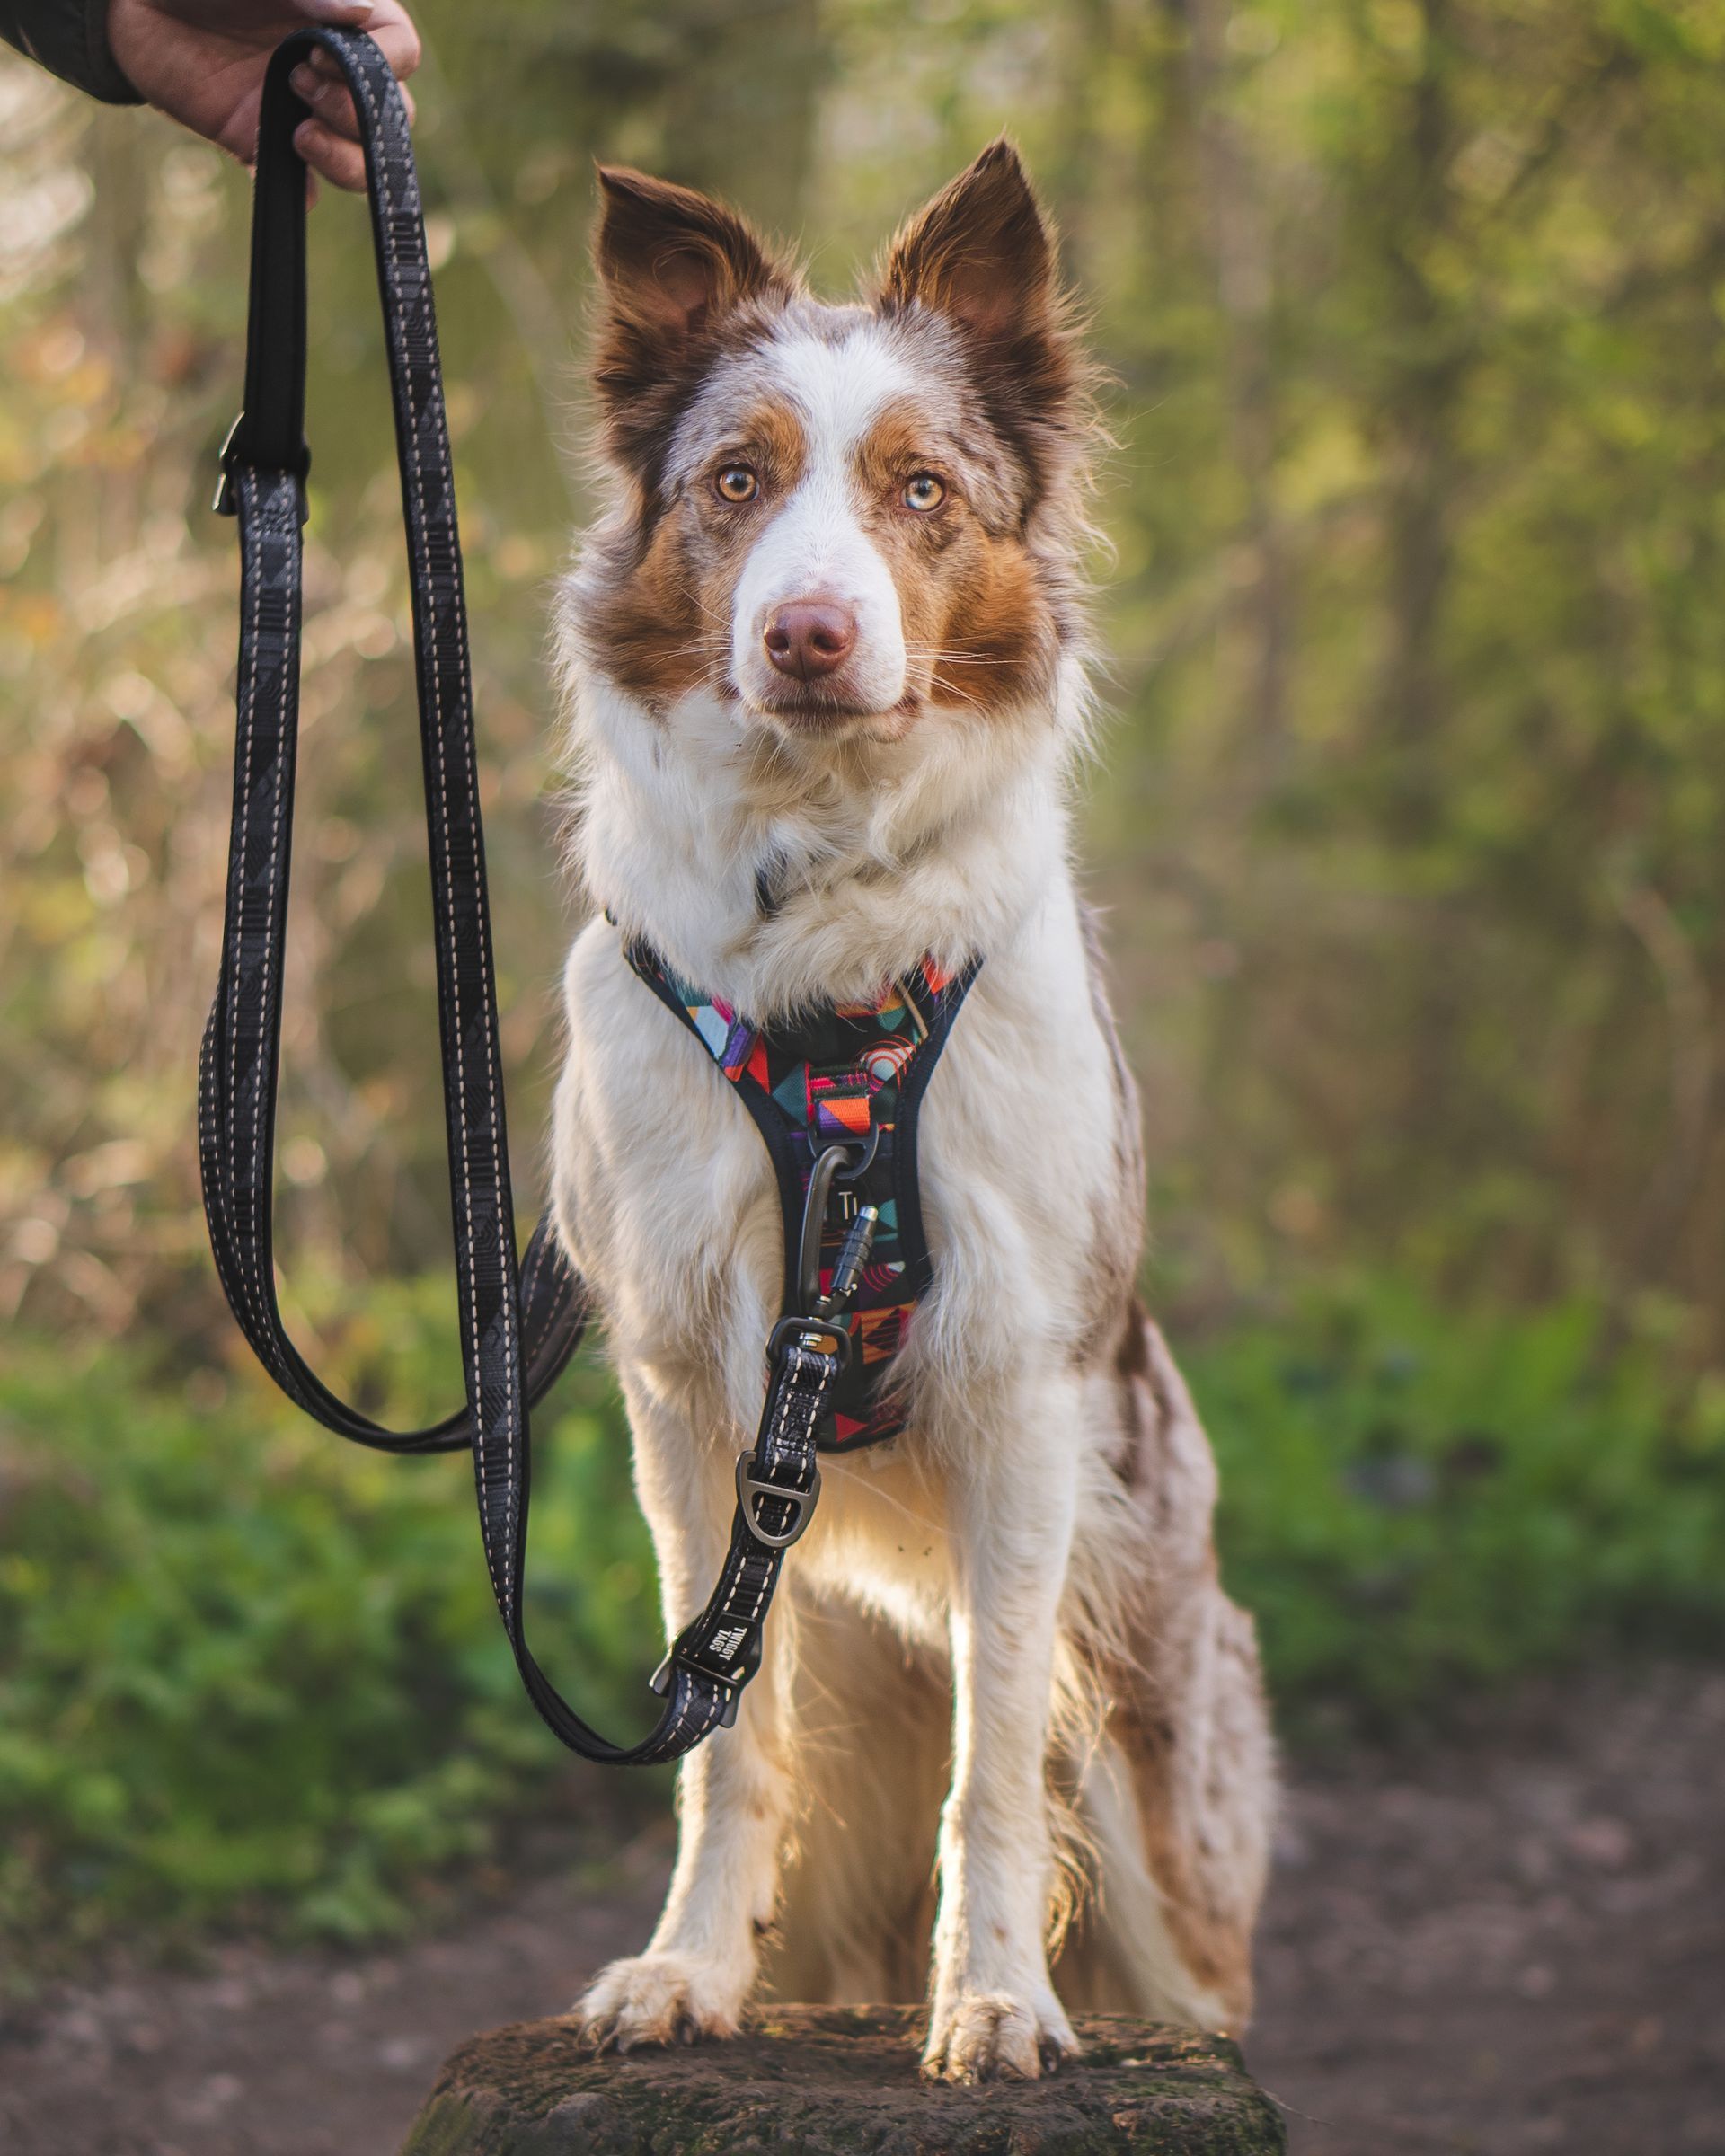 red merle border collie with twiggy tags adventure harness and twiggy tags multi-way lead clipped to the front and back of harness for training